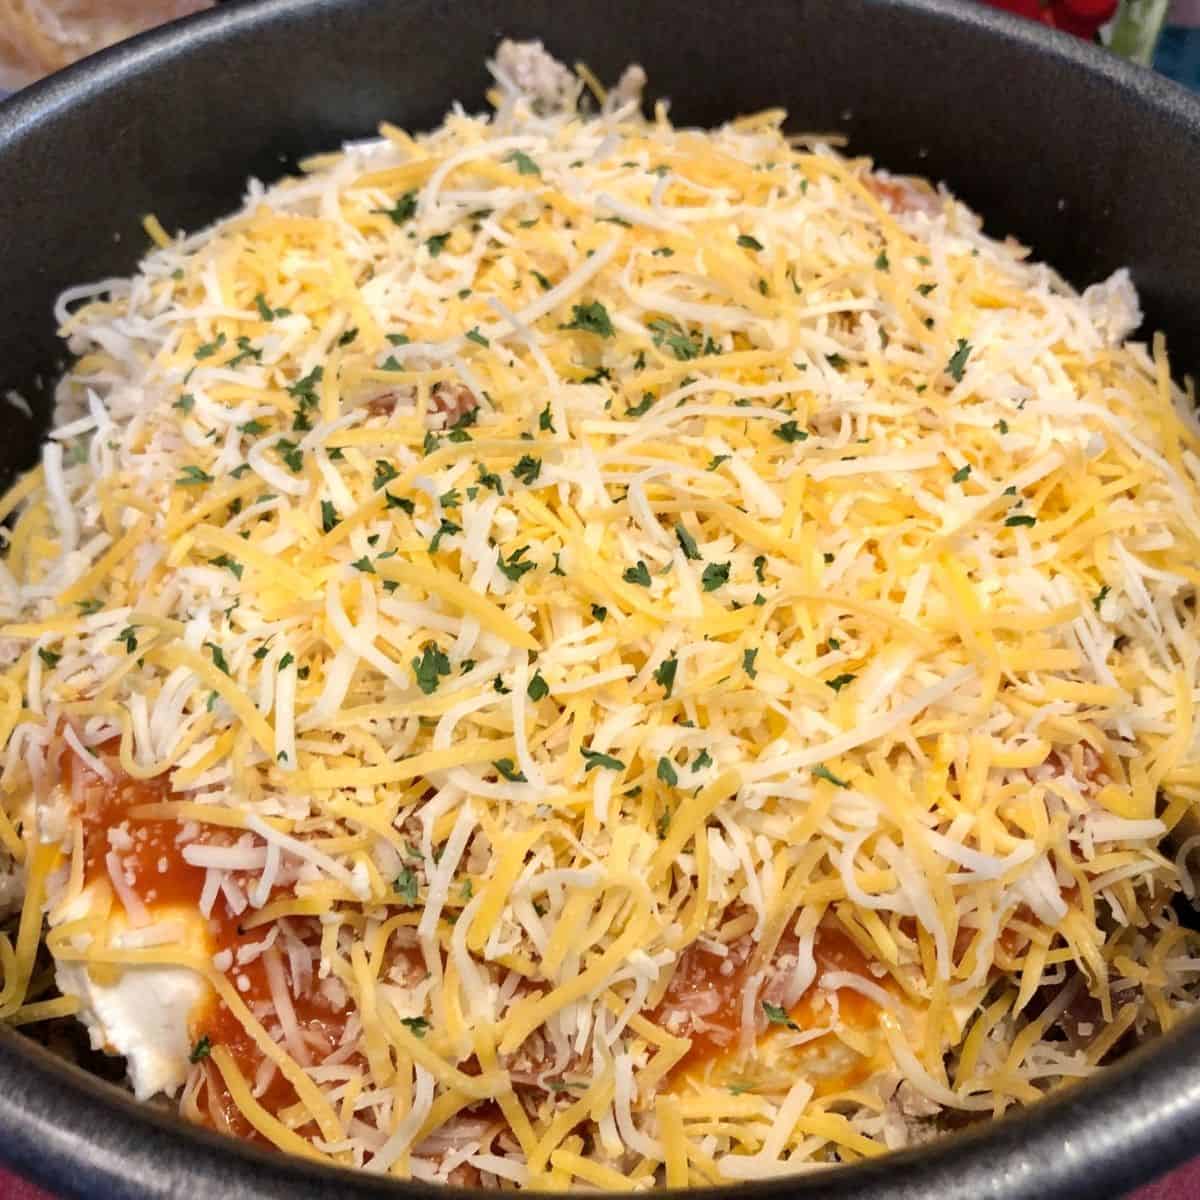 Uncooked Lasagna in a pan